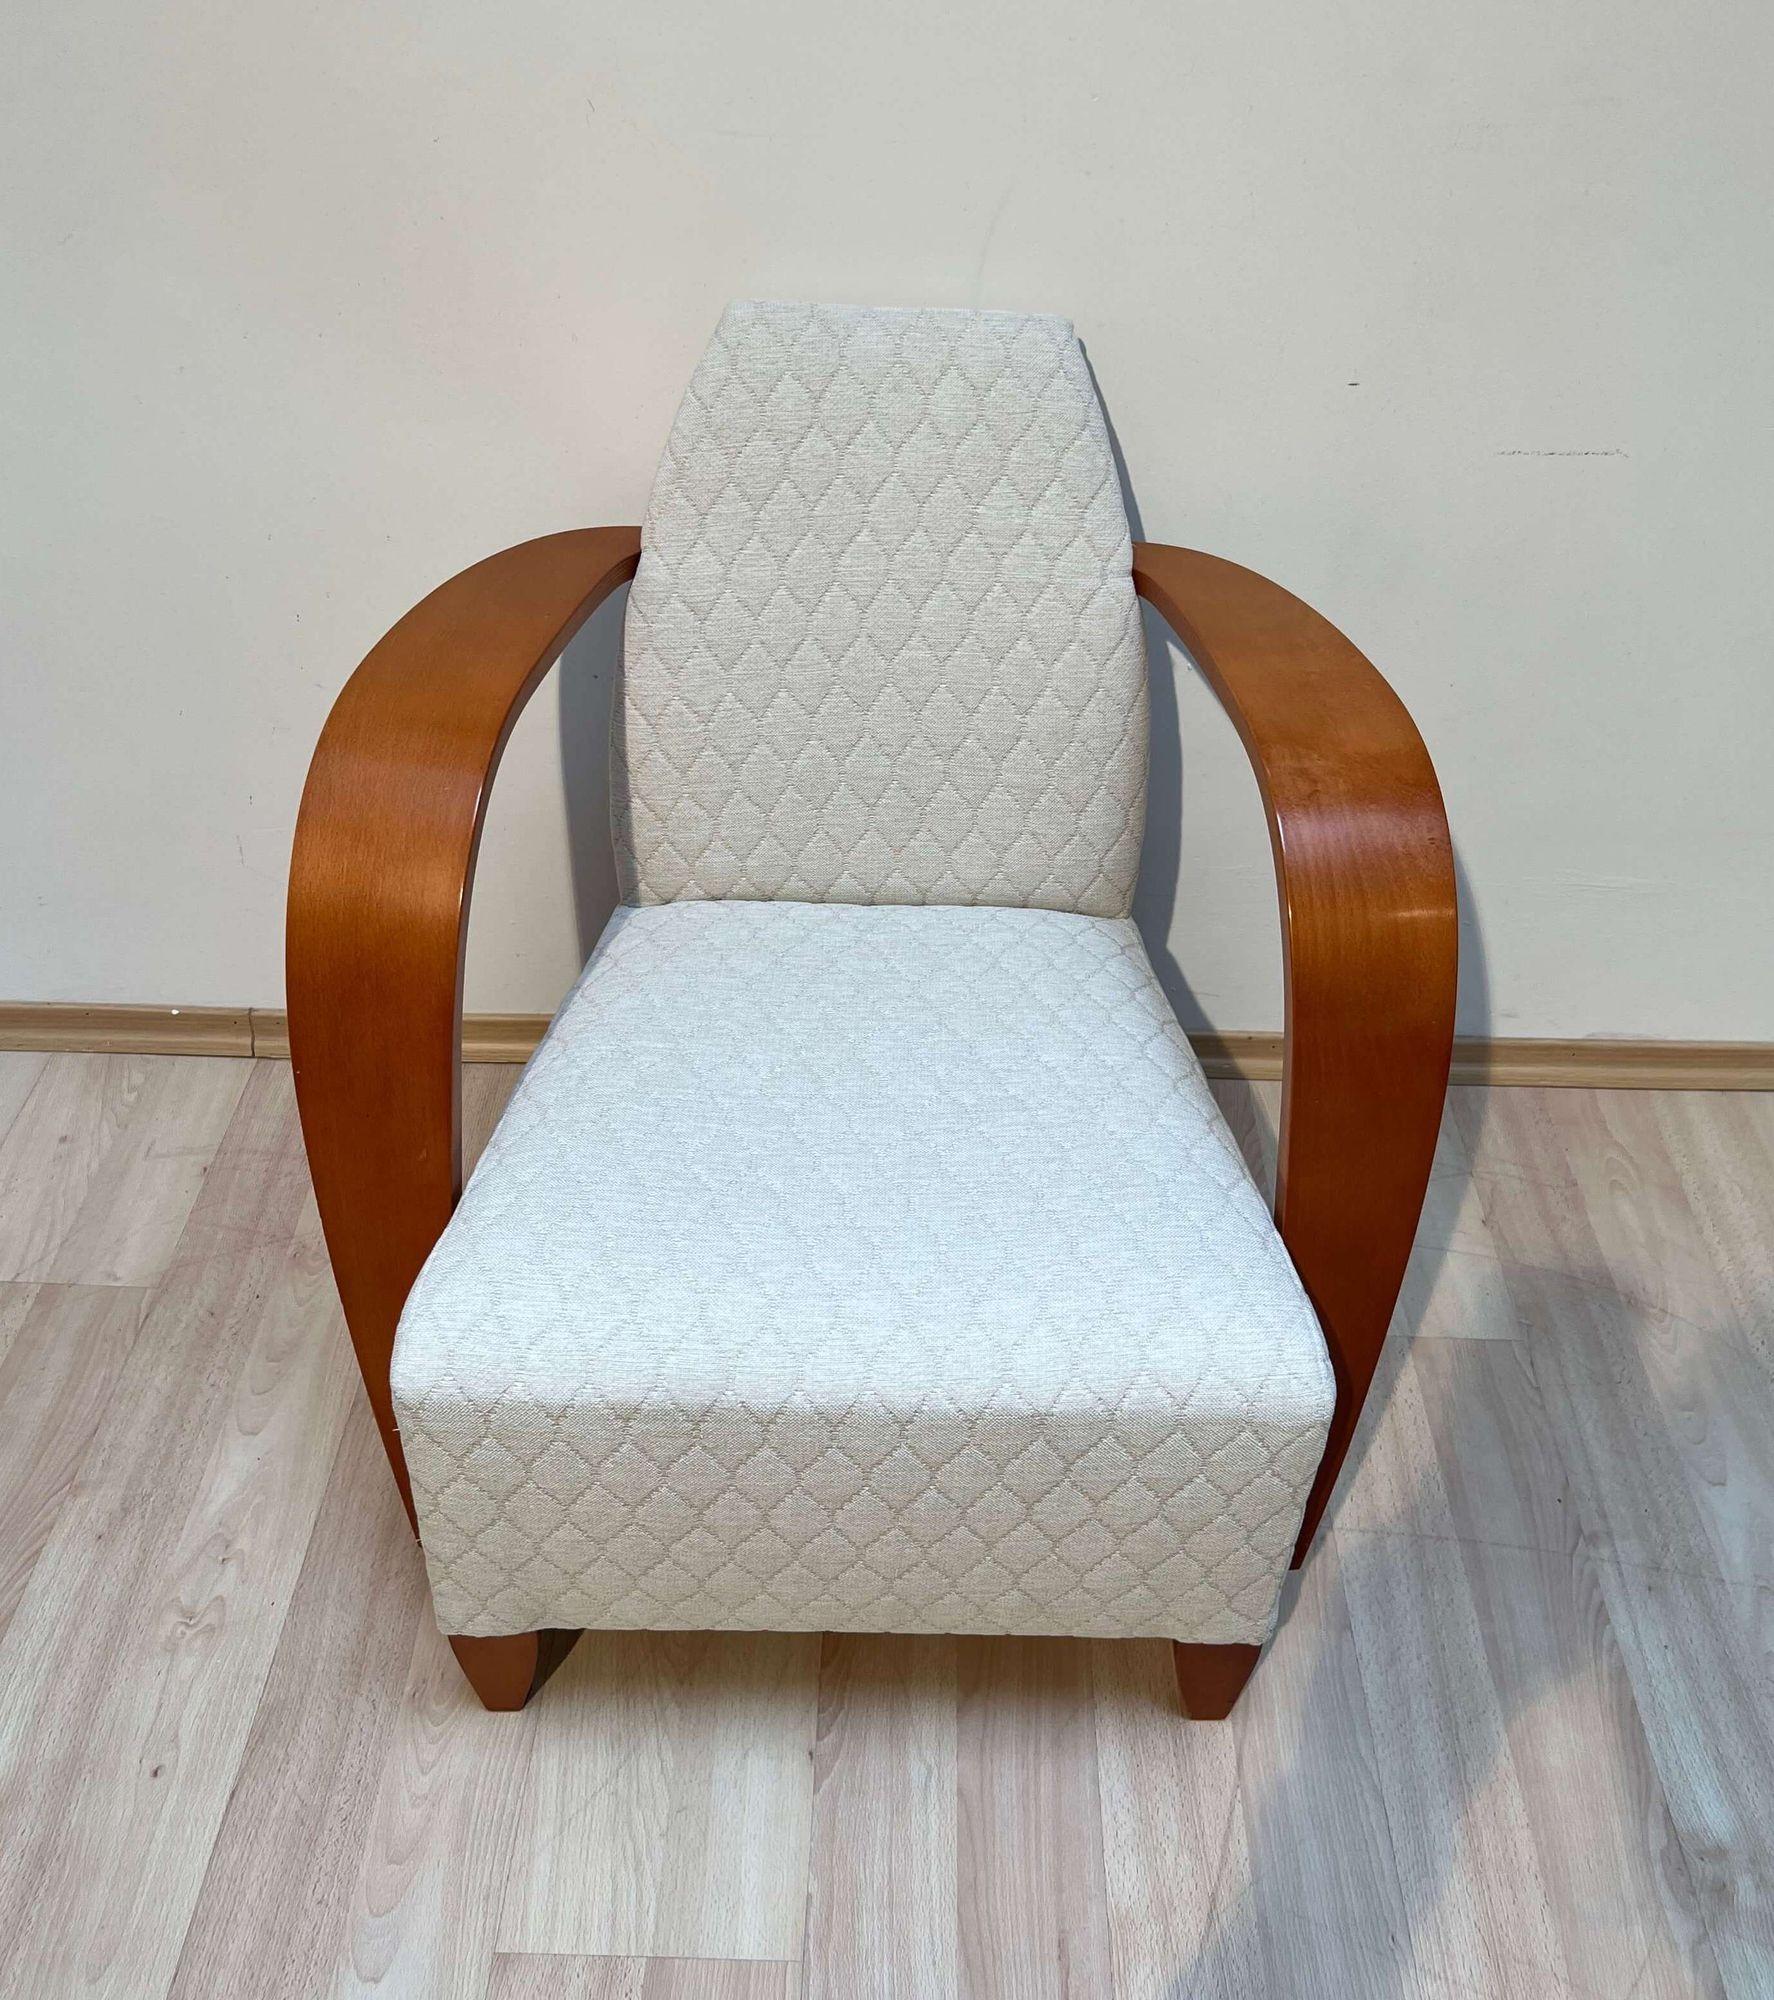 Modern Design Arm Chair, Beech Wood, Cream-white Quilt Fabric, Spain, 1990s For Sale